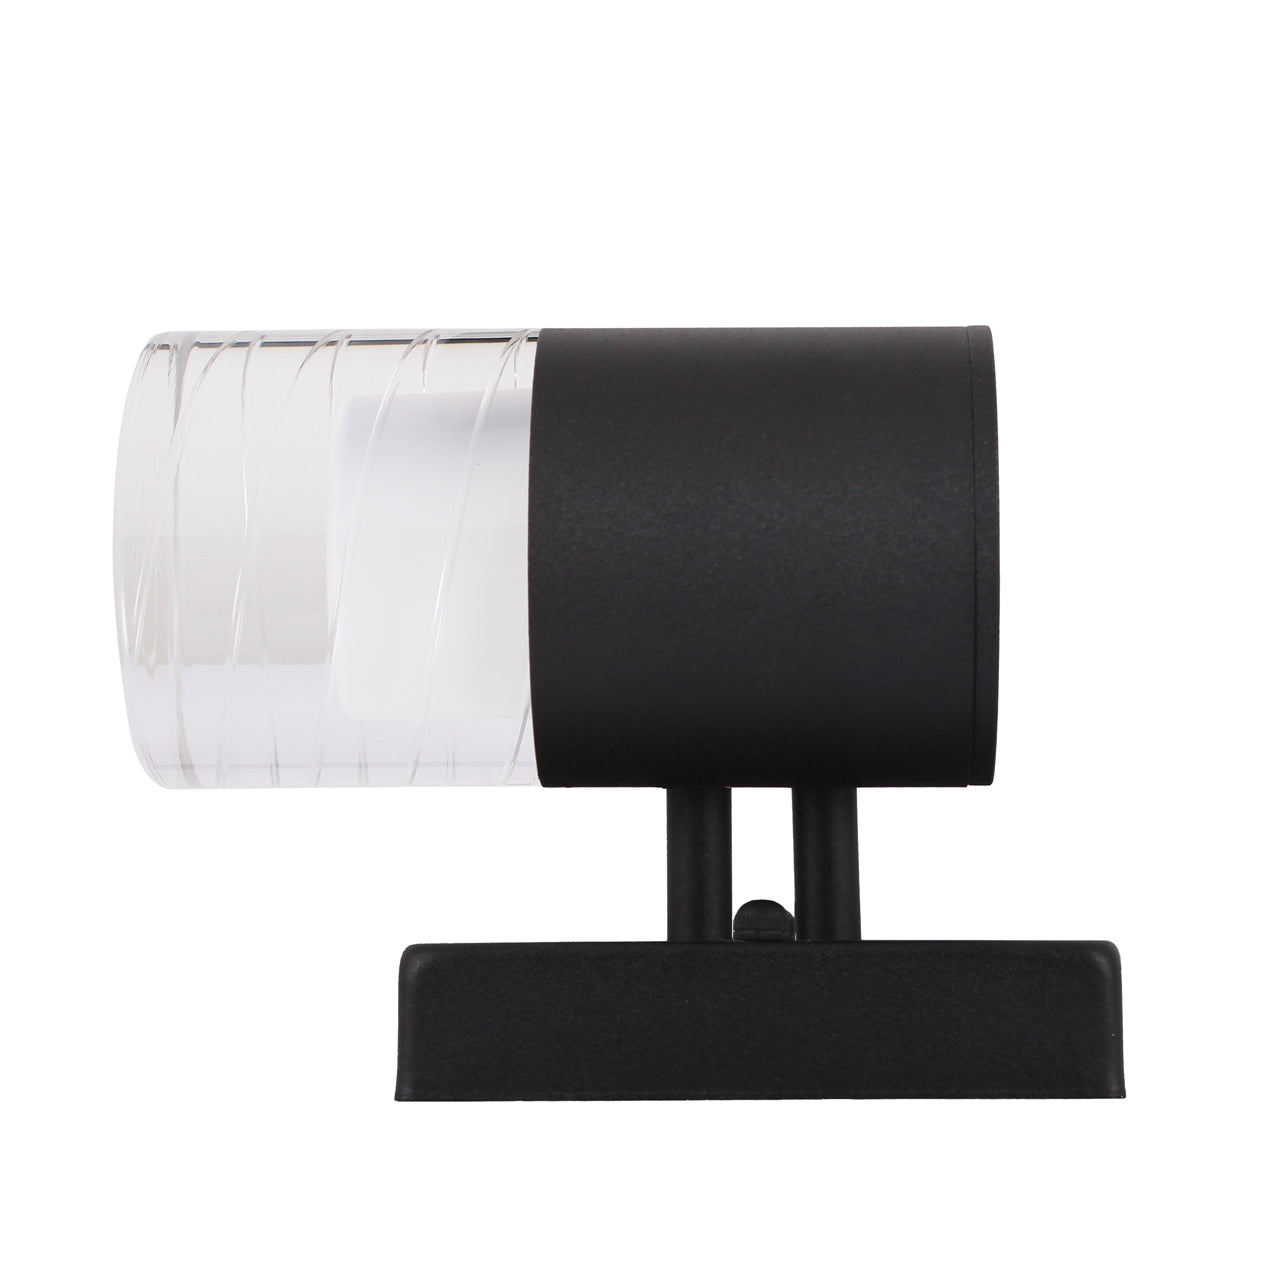 AALOK 1 Light- LED Indoor/Outdoor Wall Sconce 3000K Warm White 7" Tall